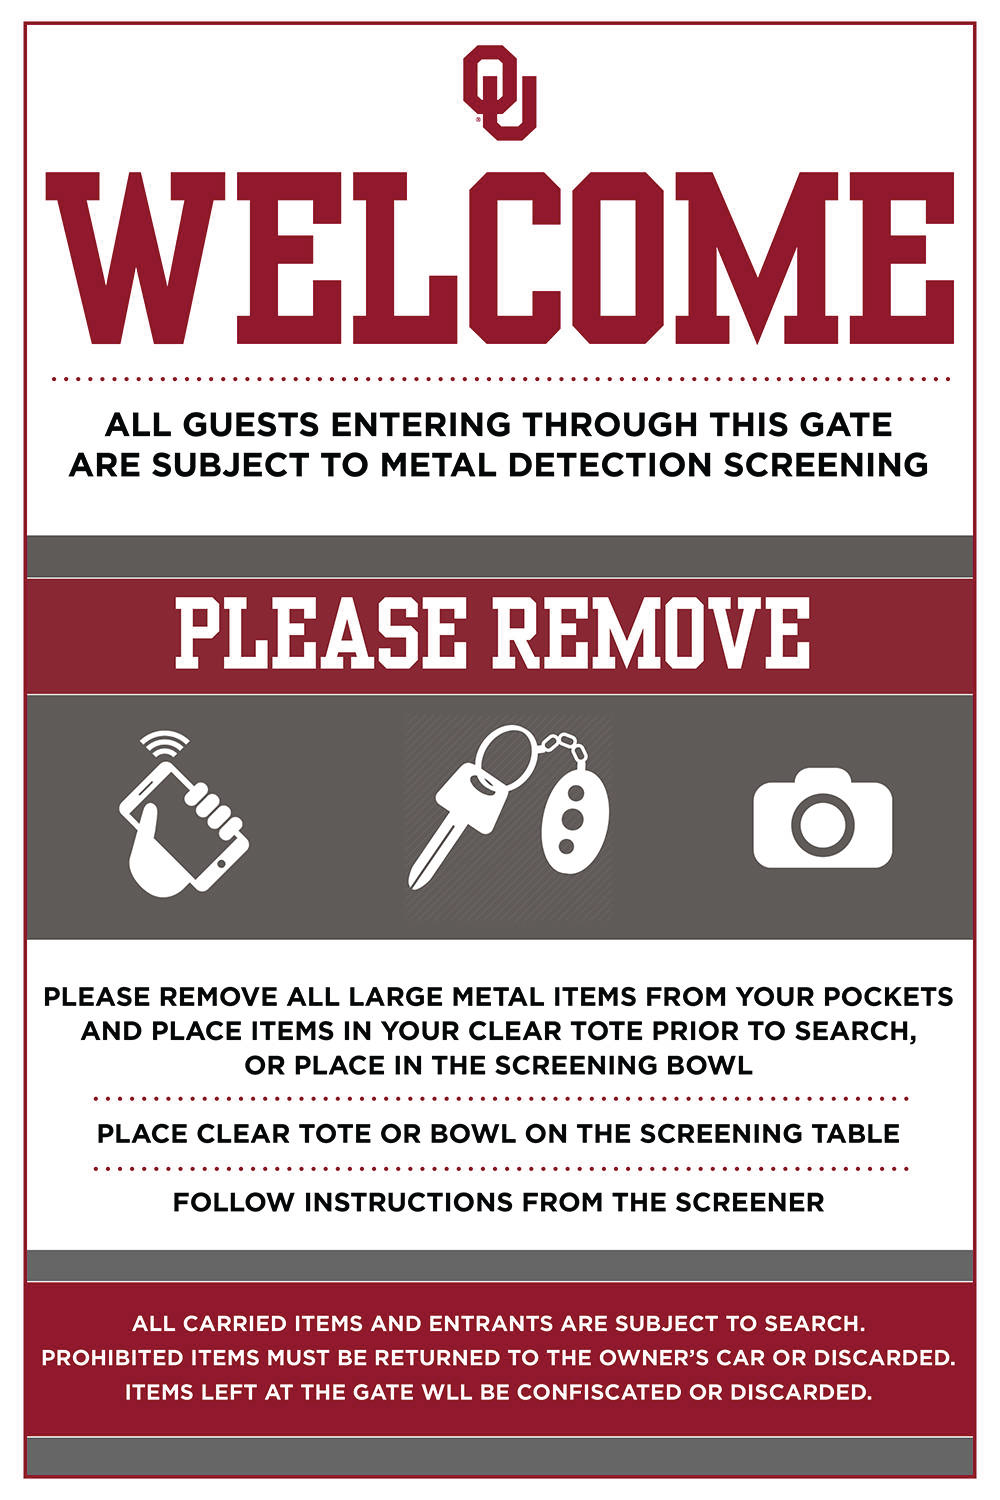 OU WELCOME - All guests enterning thrugh this gate are subject to metal detection screening. PLEASE REMOVE all large metal items from your pockets and place them in your clear tote prior to search or place in the screening bowl. Place clear tote or bowl on the screening table. Follow instructions from the screener. ALL CARRIED ITEMS AND ENTRANTS ARE SUBJECT TO SEARCH. PROHIBITED ITEMS MUST BE RETURNED TO THE OWNER'S CAR OR DISCARDED. ITEMS LEFT AT THE GATE WILL BE CONFISCATED OR DISCARDED. 